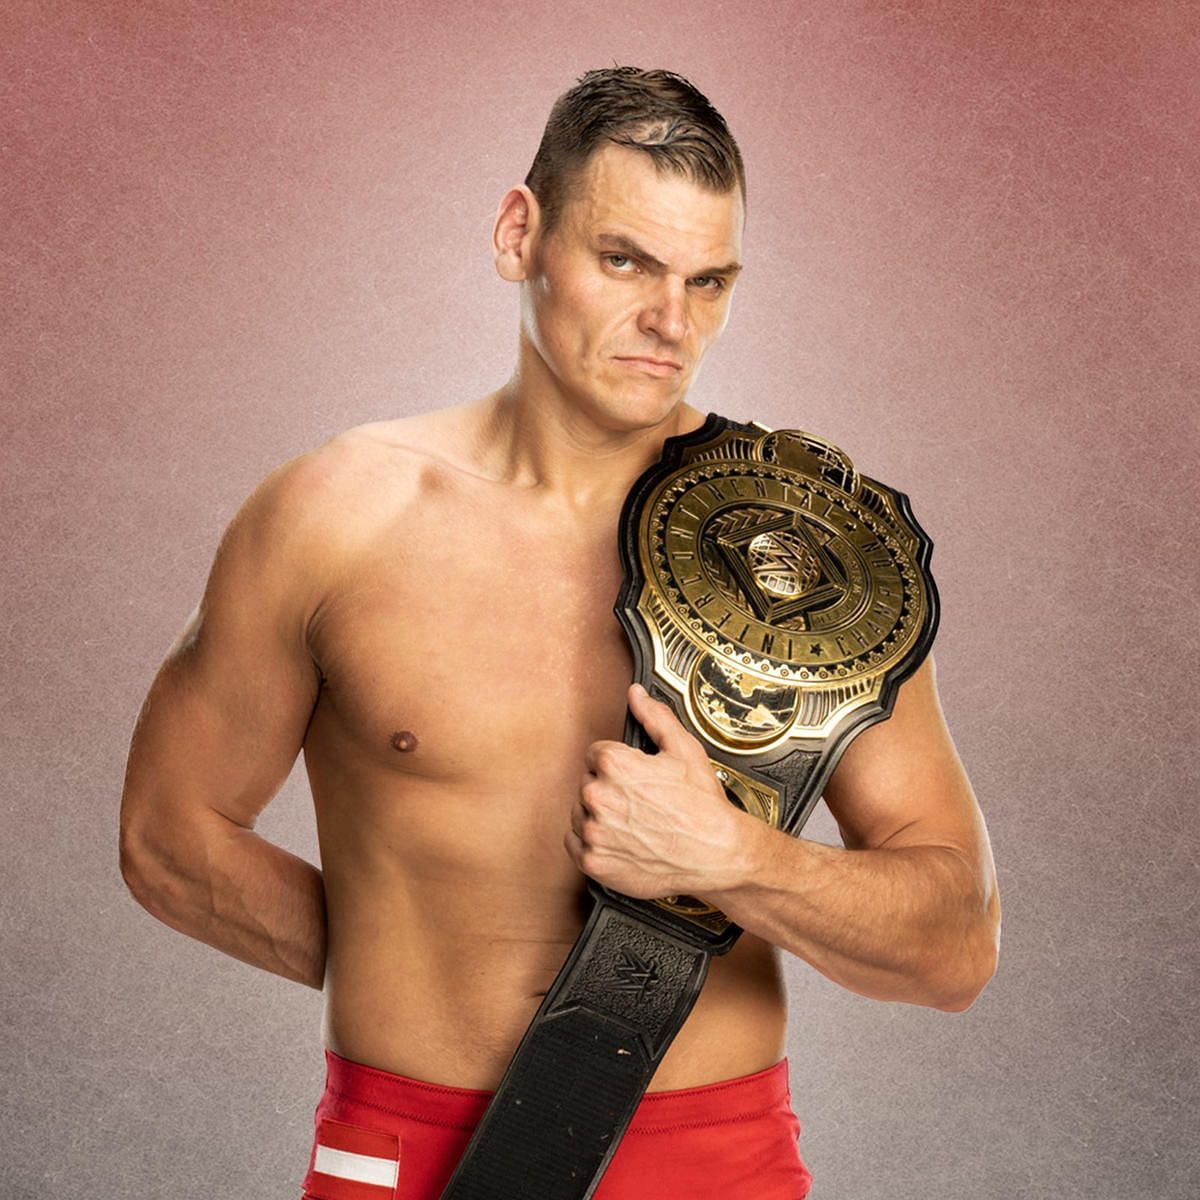 Gunther has dominated as the Intercontinental Champion.